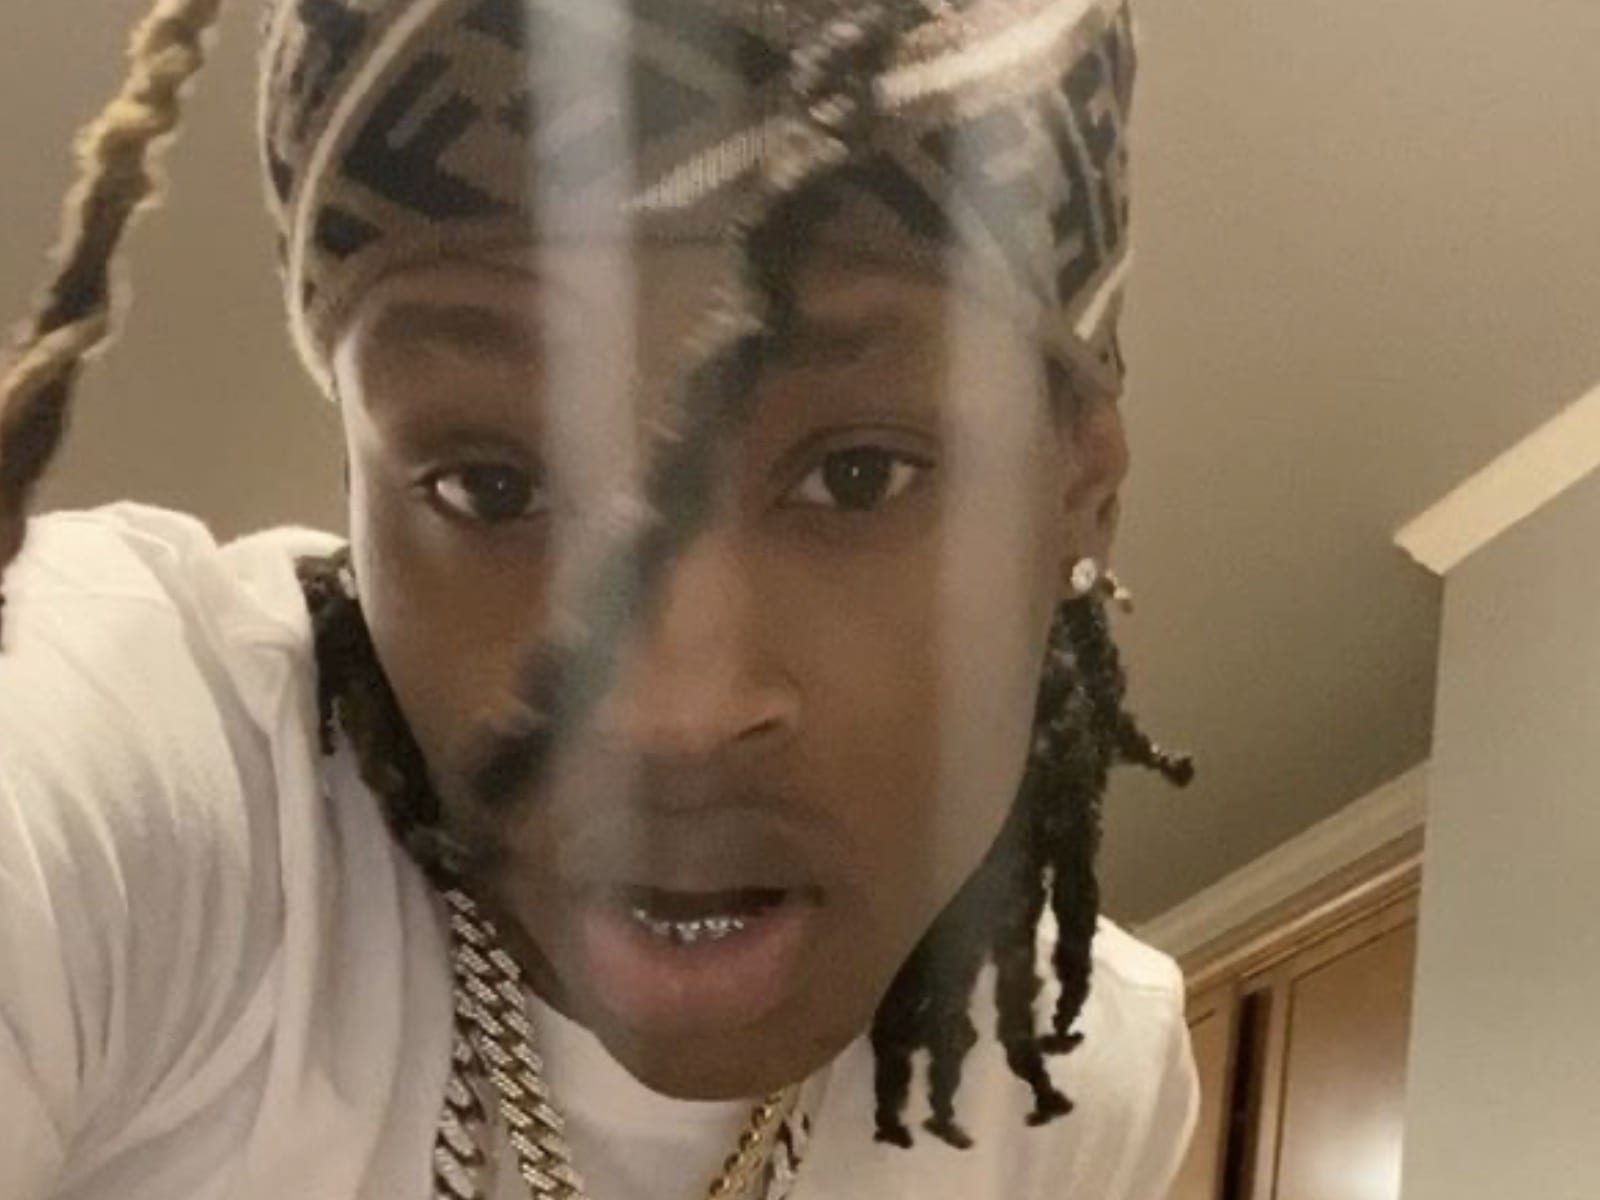 King Von Shot and in Critical Condition After Altercation